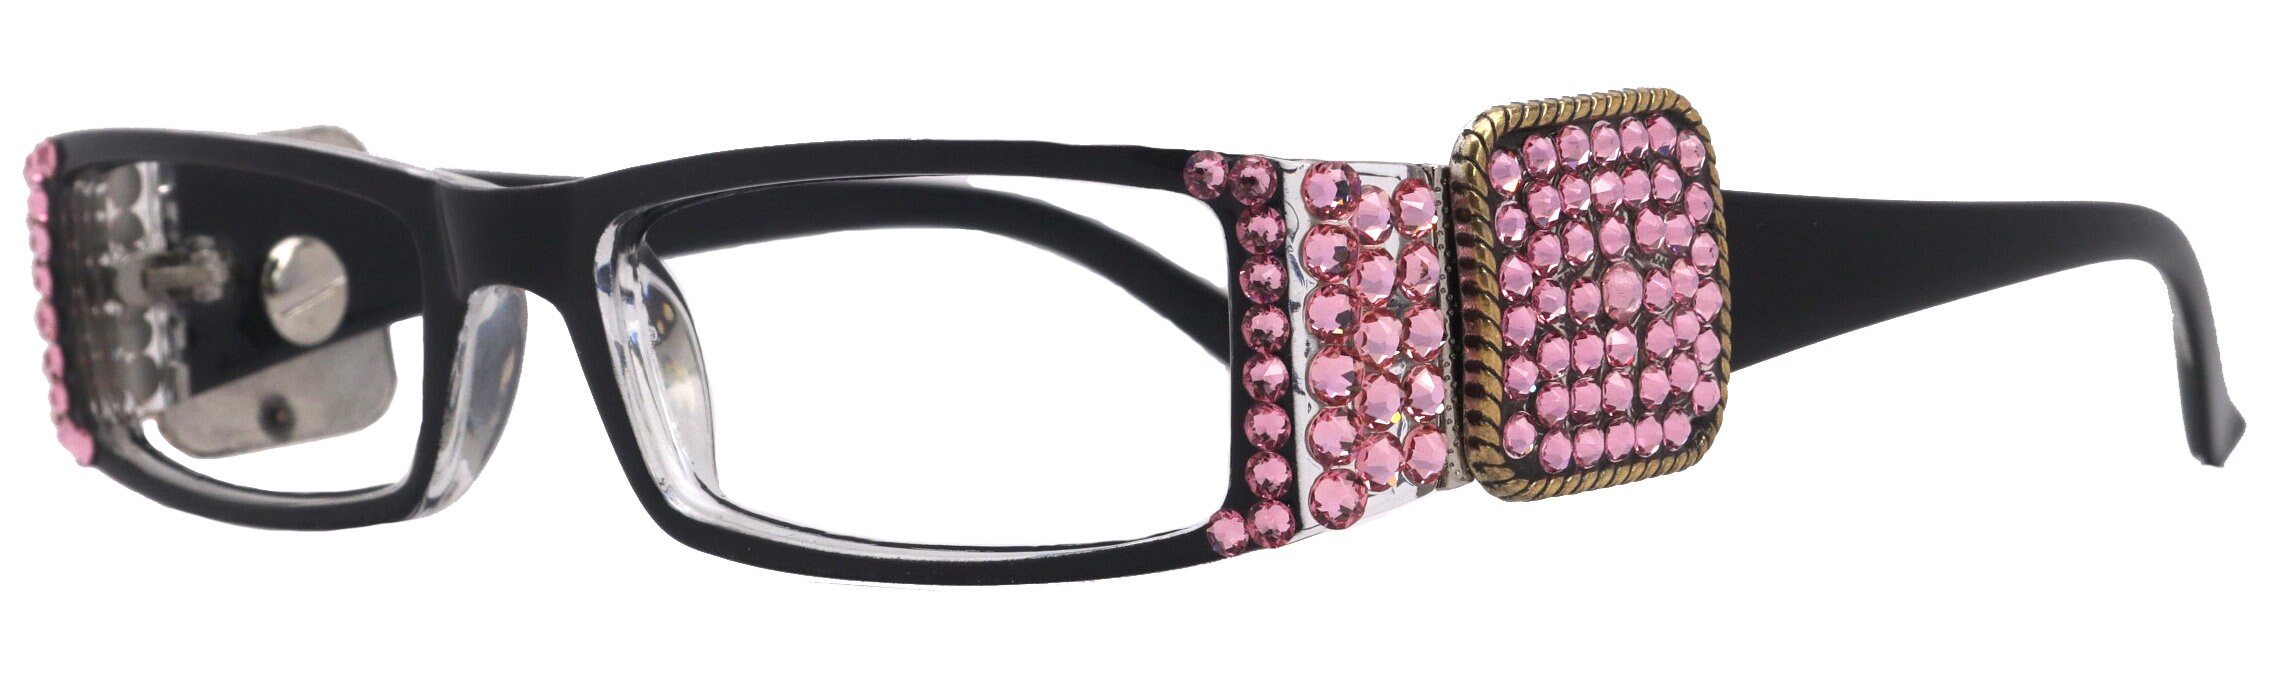 The Medallion, (Bling) Reading Glasses for Women Black W (Light Rose Genuine European Crystals Western Concho NY Fifth Avenue